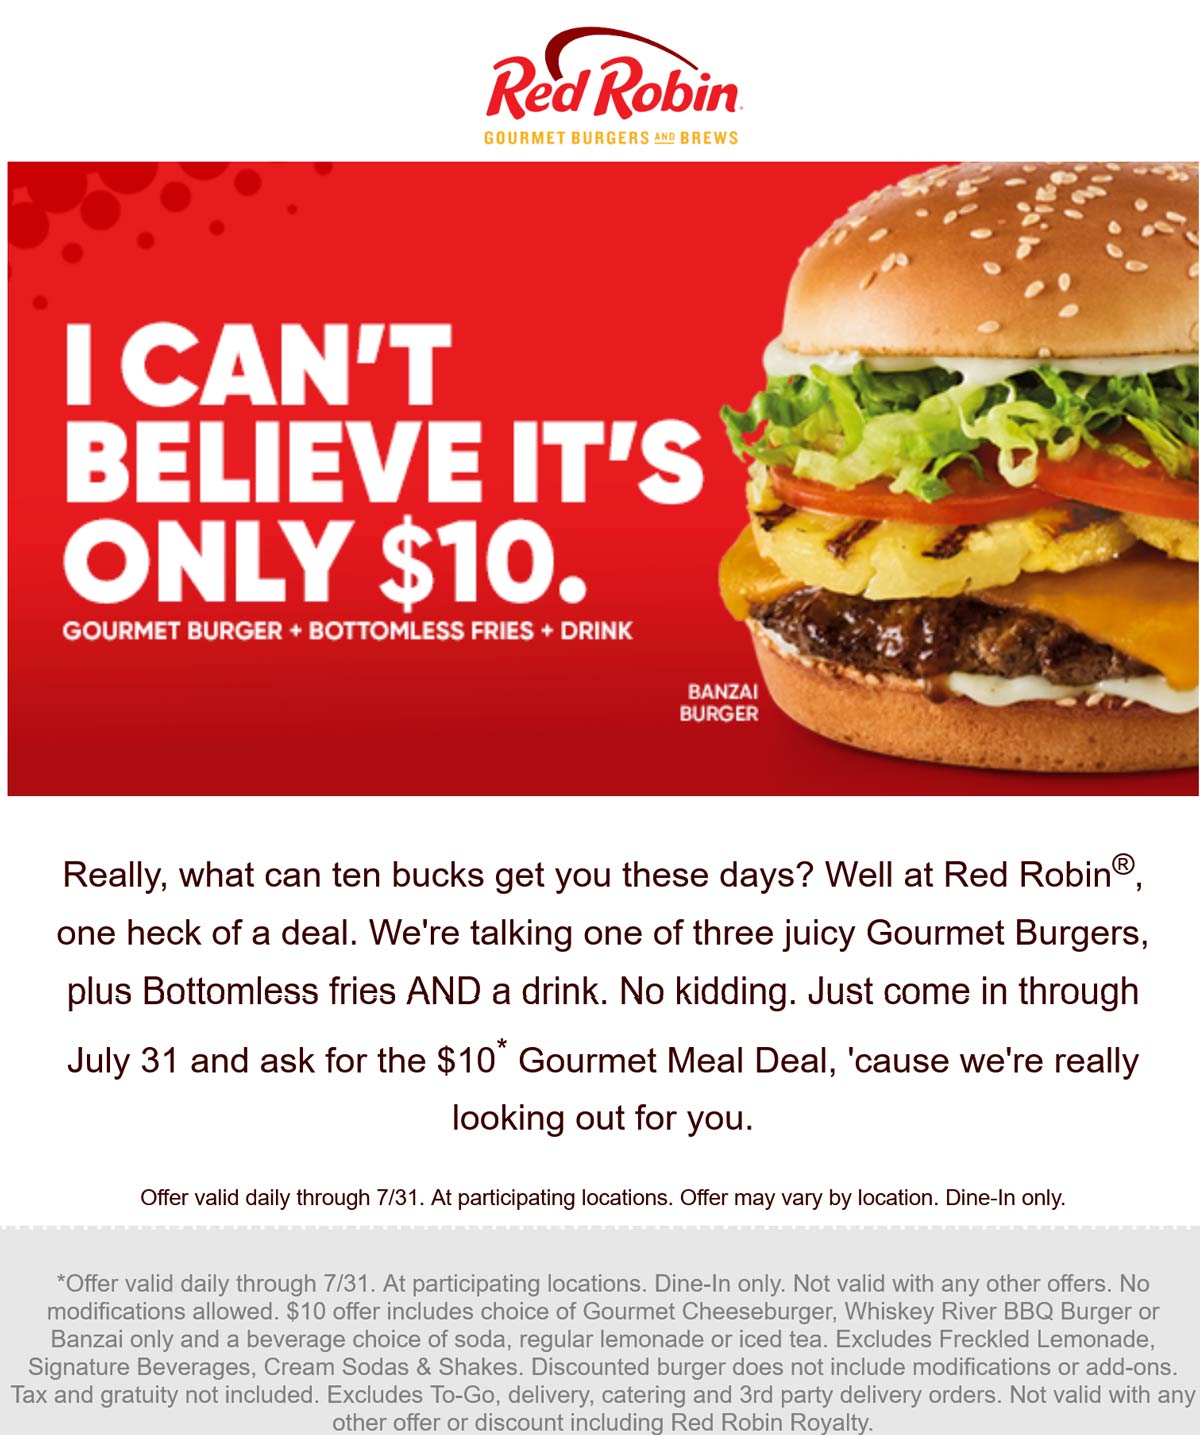 Red Robin restaurants Coupon  Gourmet cheeseburger + unlimited french fries + drink = $10 at Red Robin #redrobin 